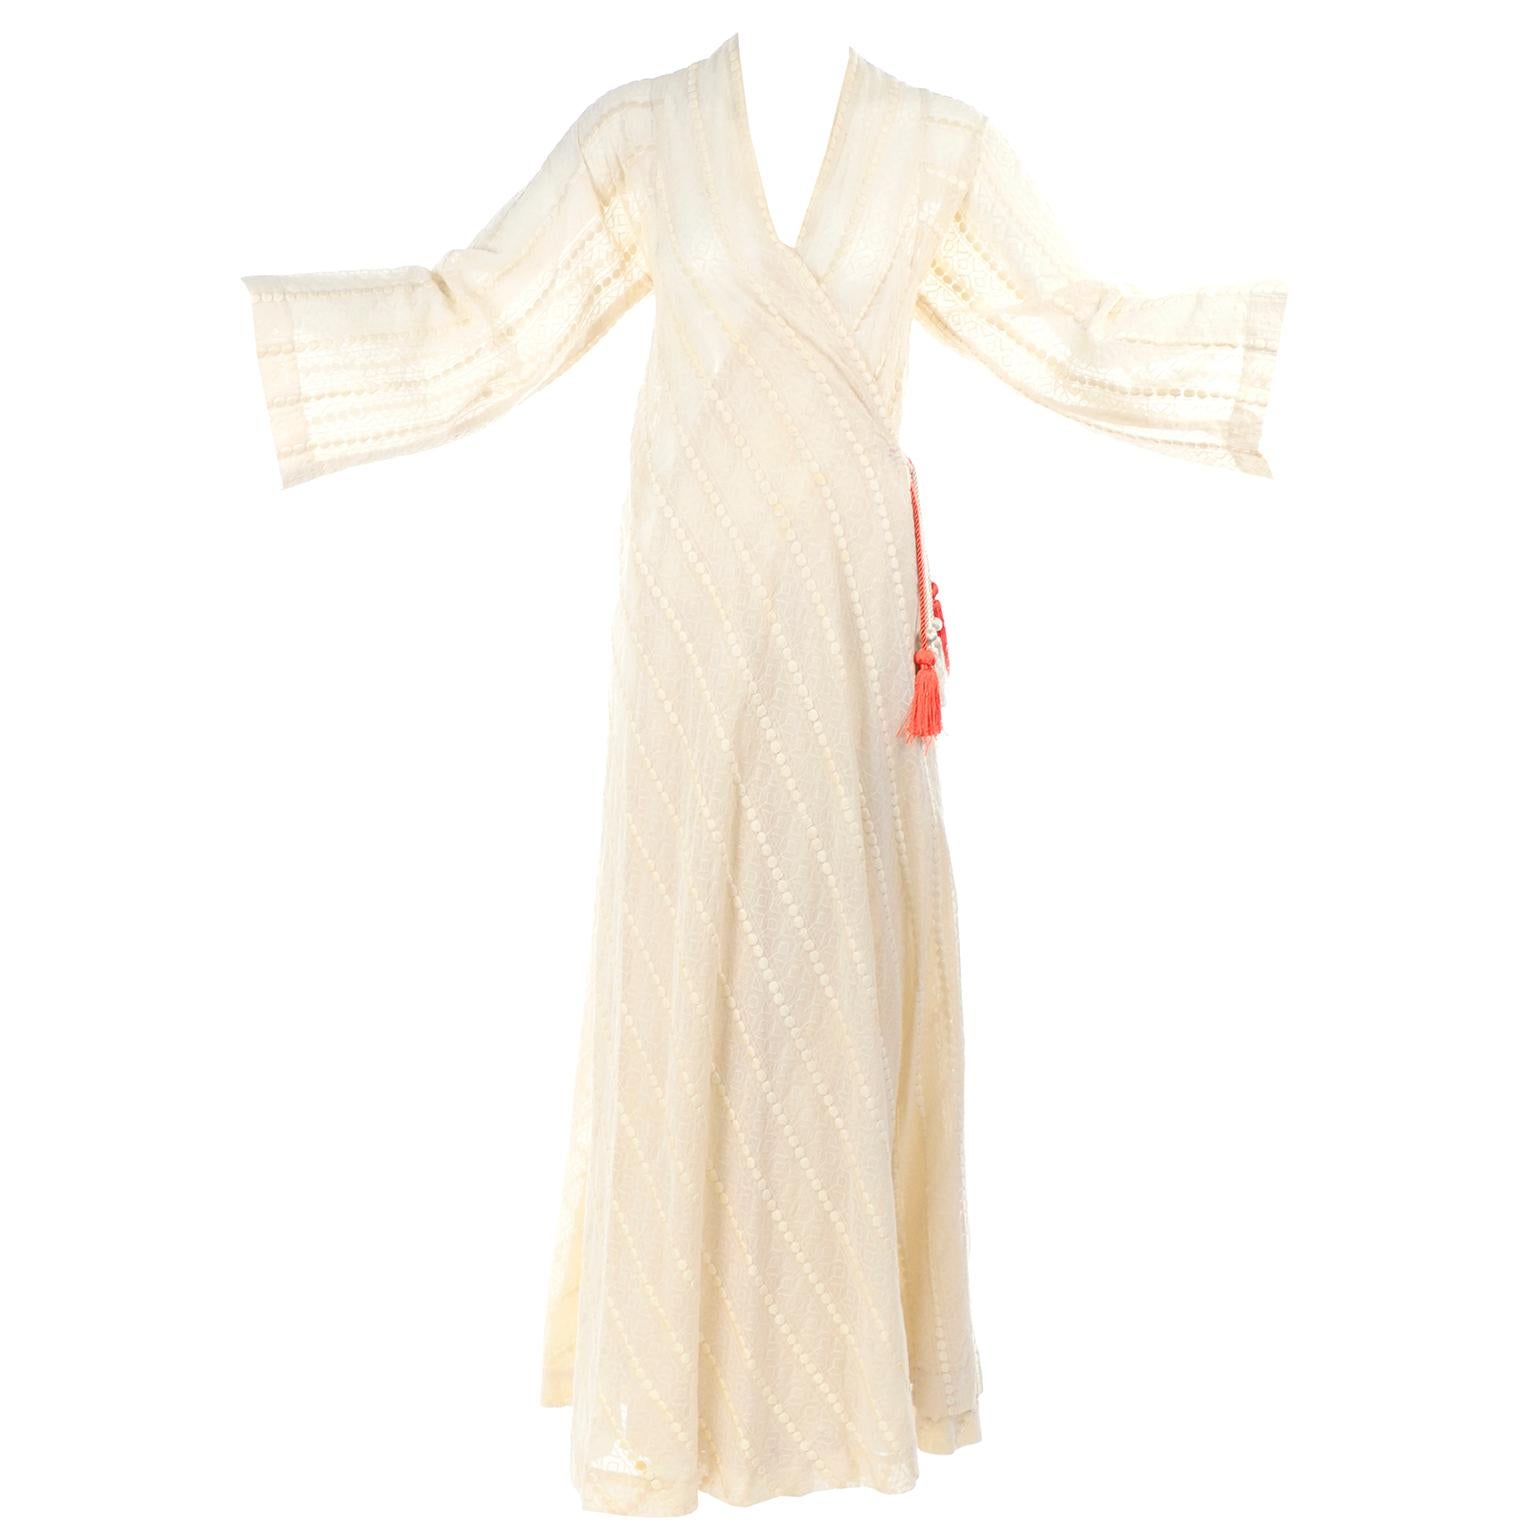 1970s Phyllis Sues Vintage Cream Dot Embroidered Cotton Wrap Dress W Tassels 2